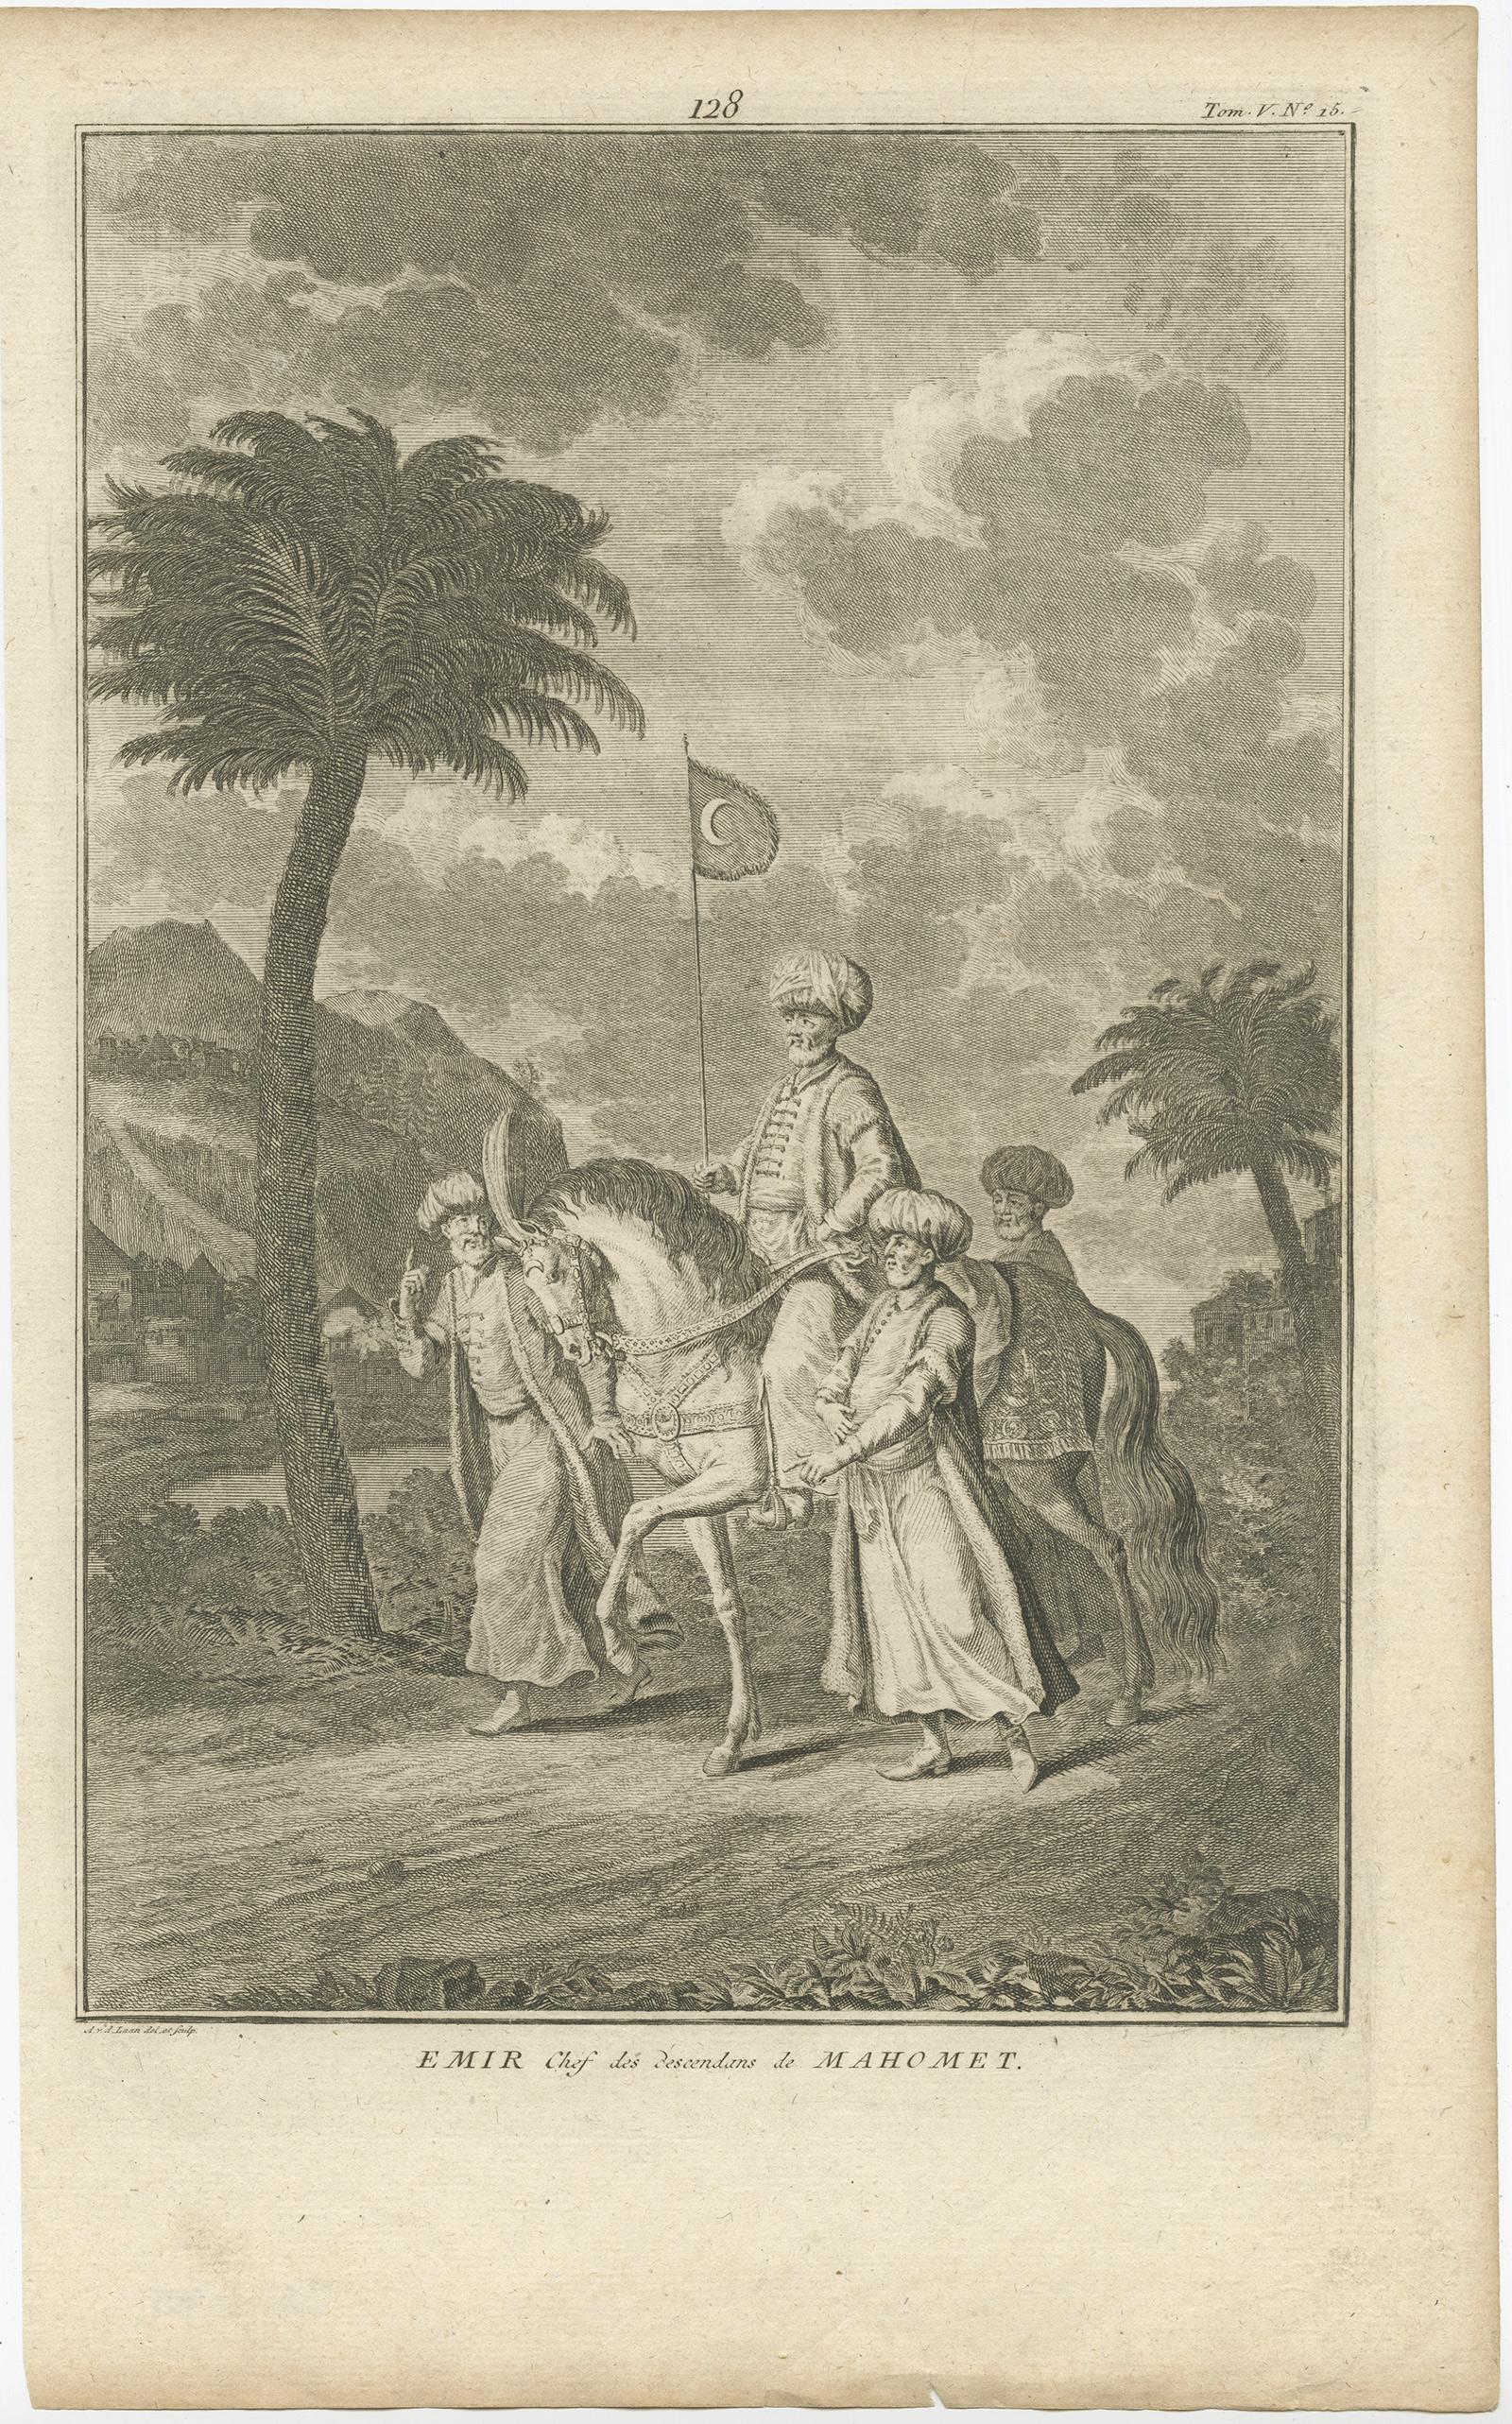 Antique print titled 'Emir Chef des descendans de Mahomet'. 

Old print of an Islamic Emir on a horse. This print originates from 'Ceremonies et coutumes Religieuses (..)'. 

Artists and Engravers: Author: A. Moubach. Engraved by A. v.d. Laan.